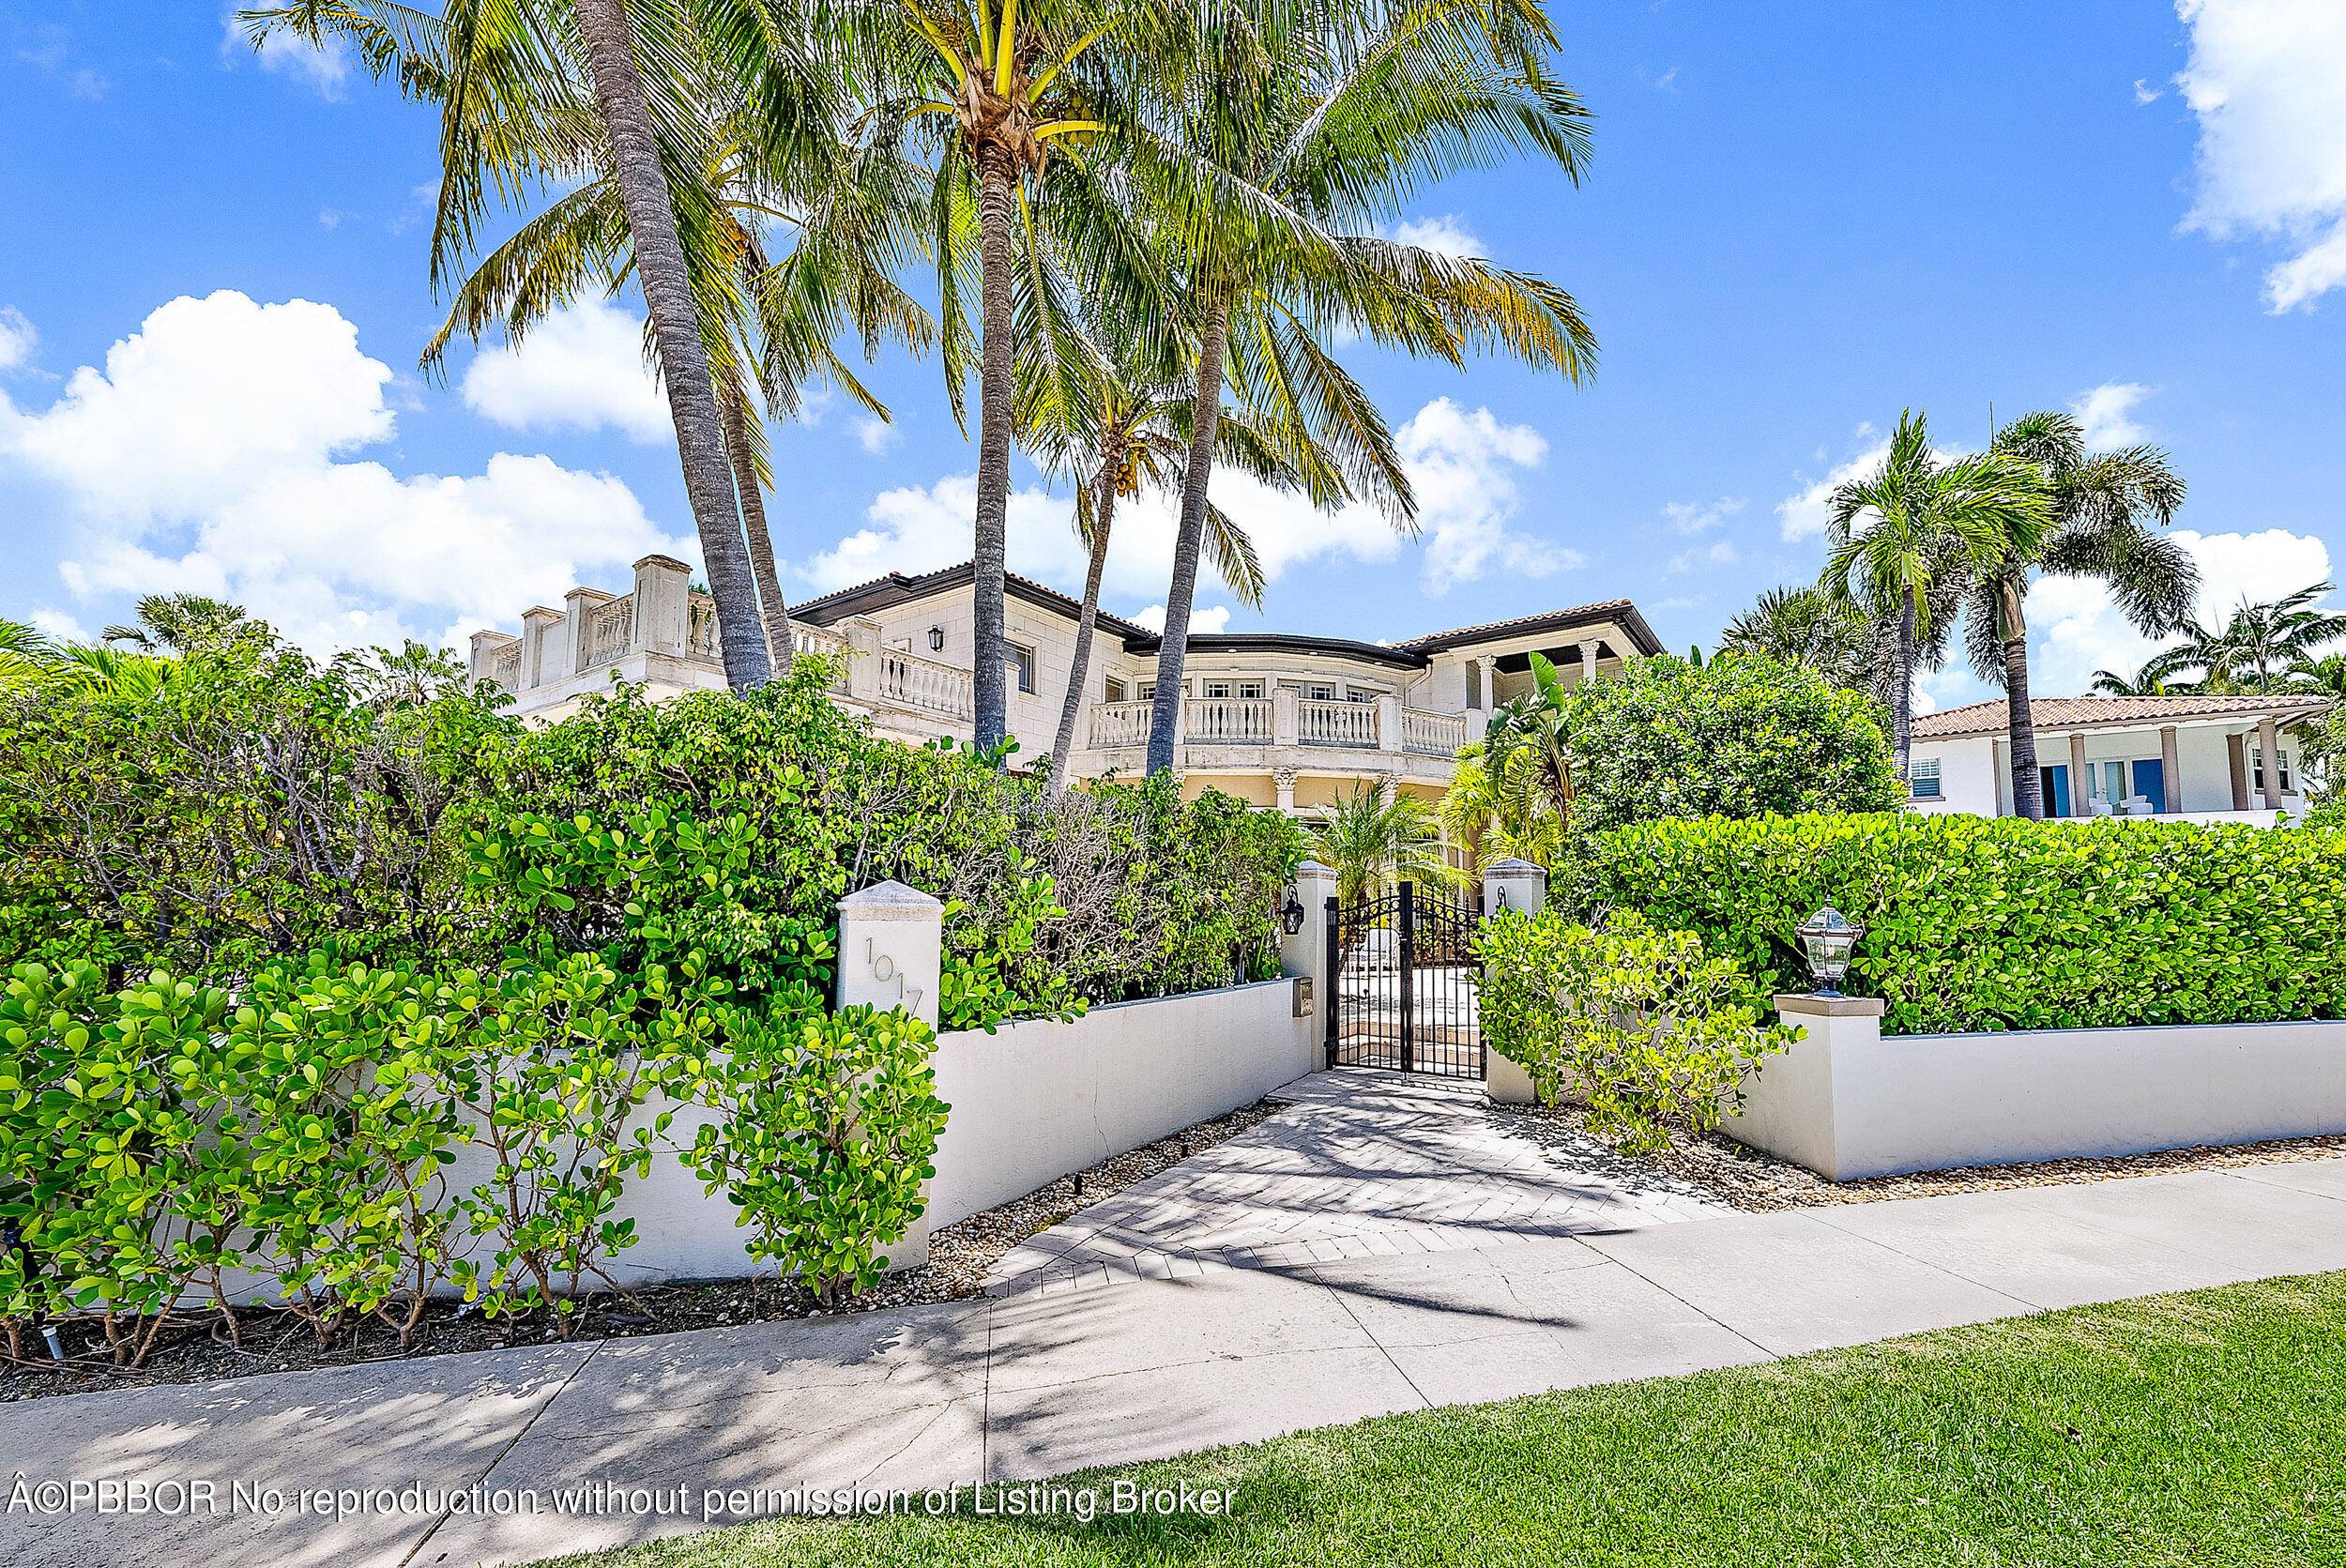 Waterfront Mediterranean home with fabulous water views of Palm Beach Island.